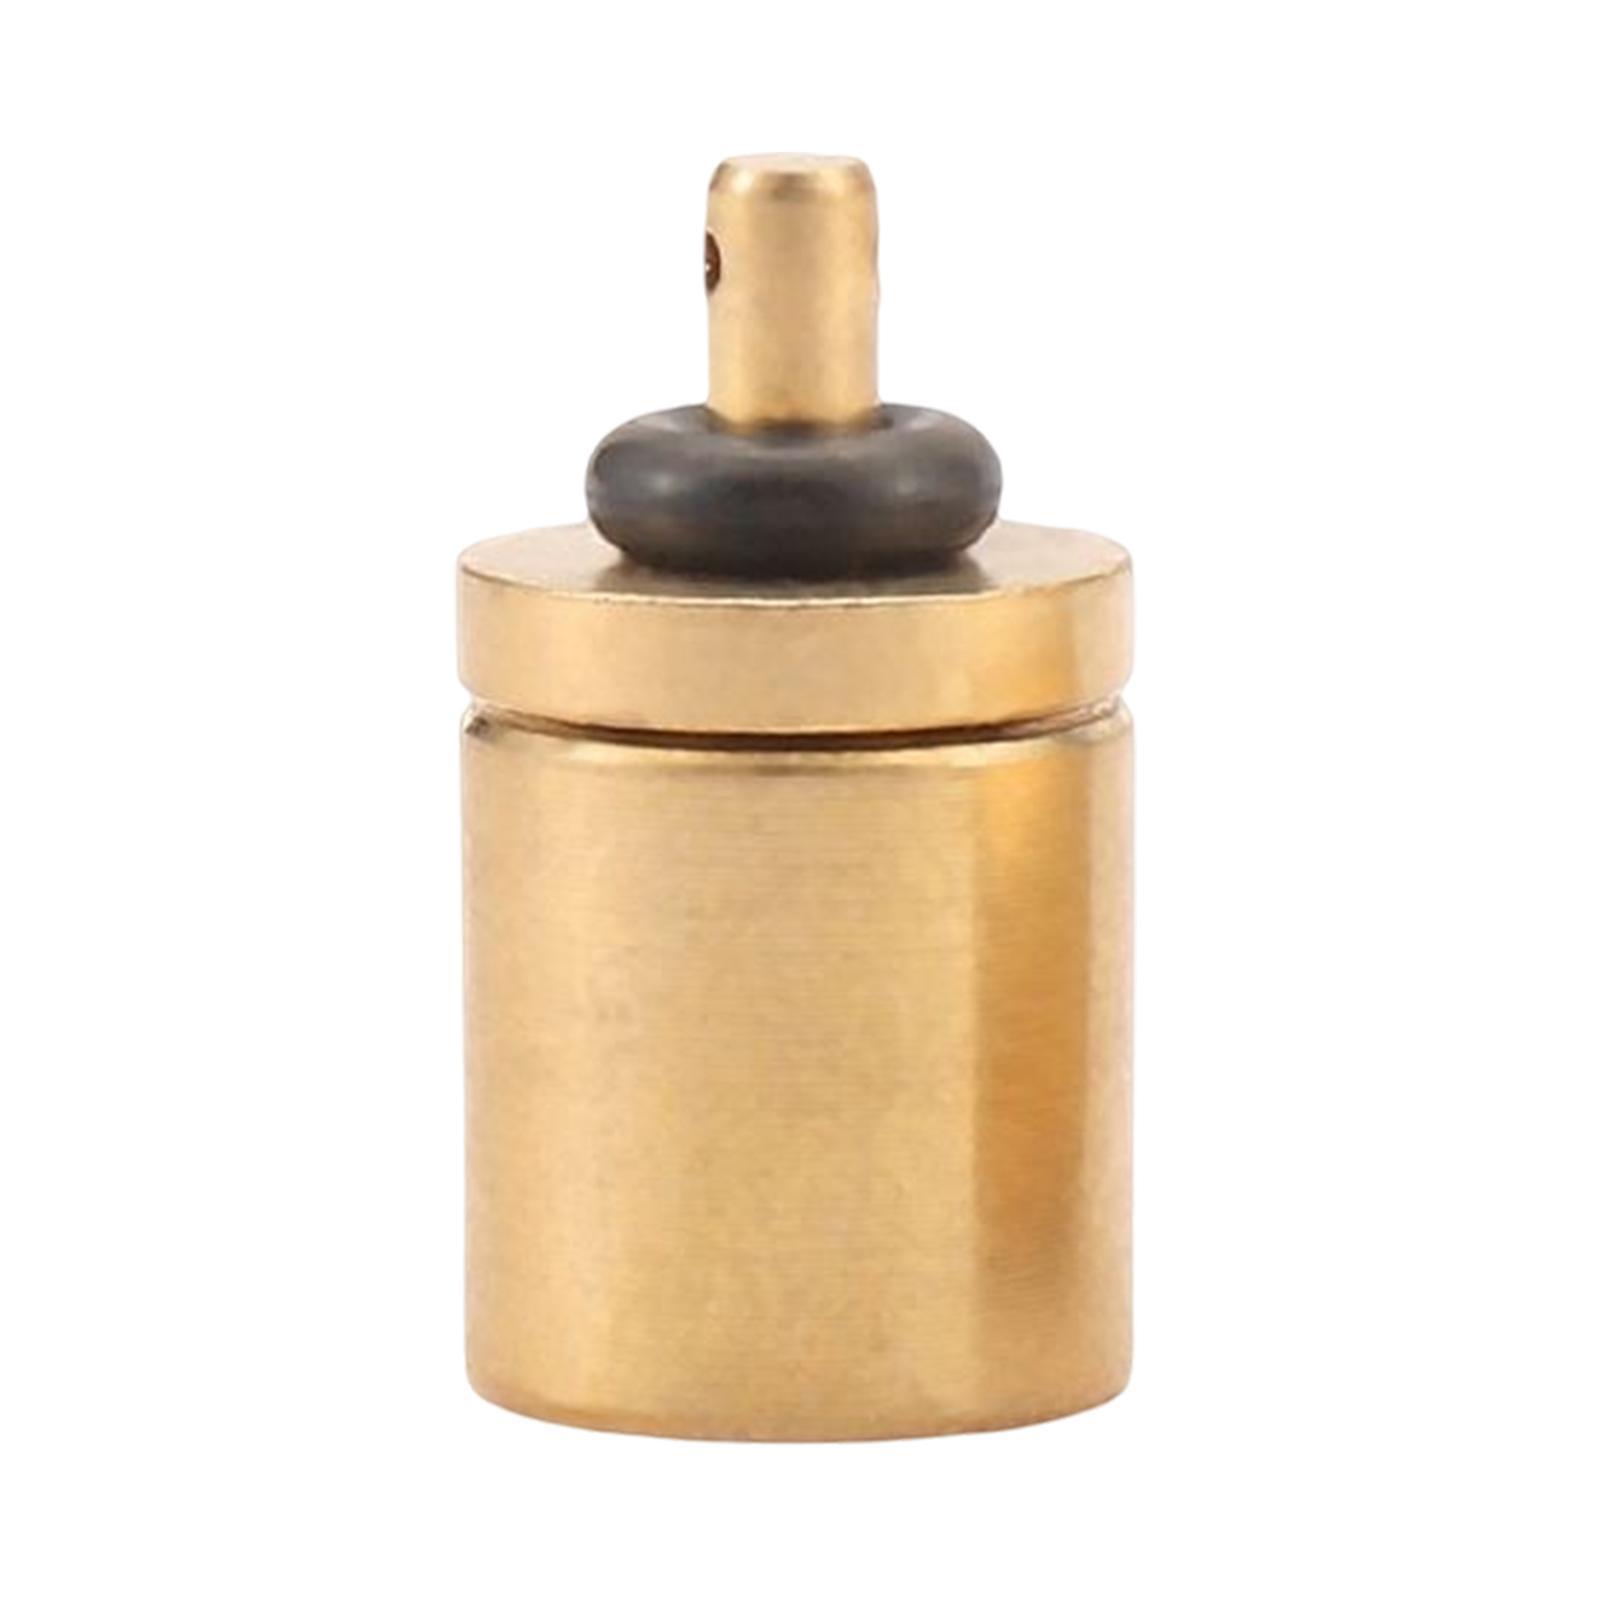 Gas Refill Adapter Metal Portable for Gas Cylinder Burner Accessories Hiking